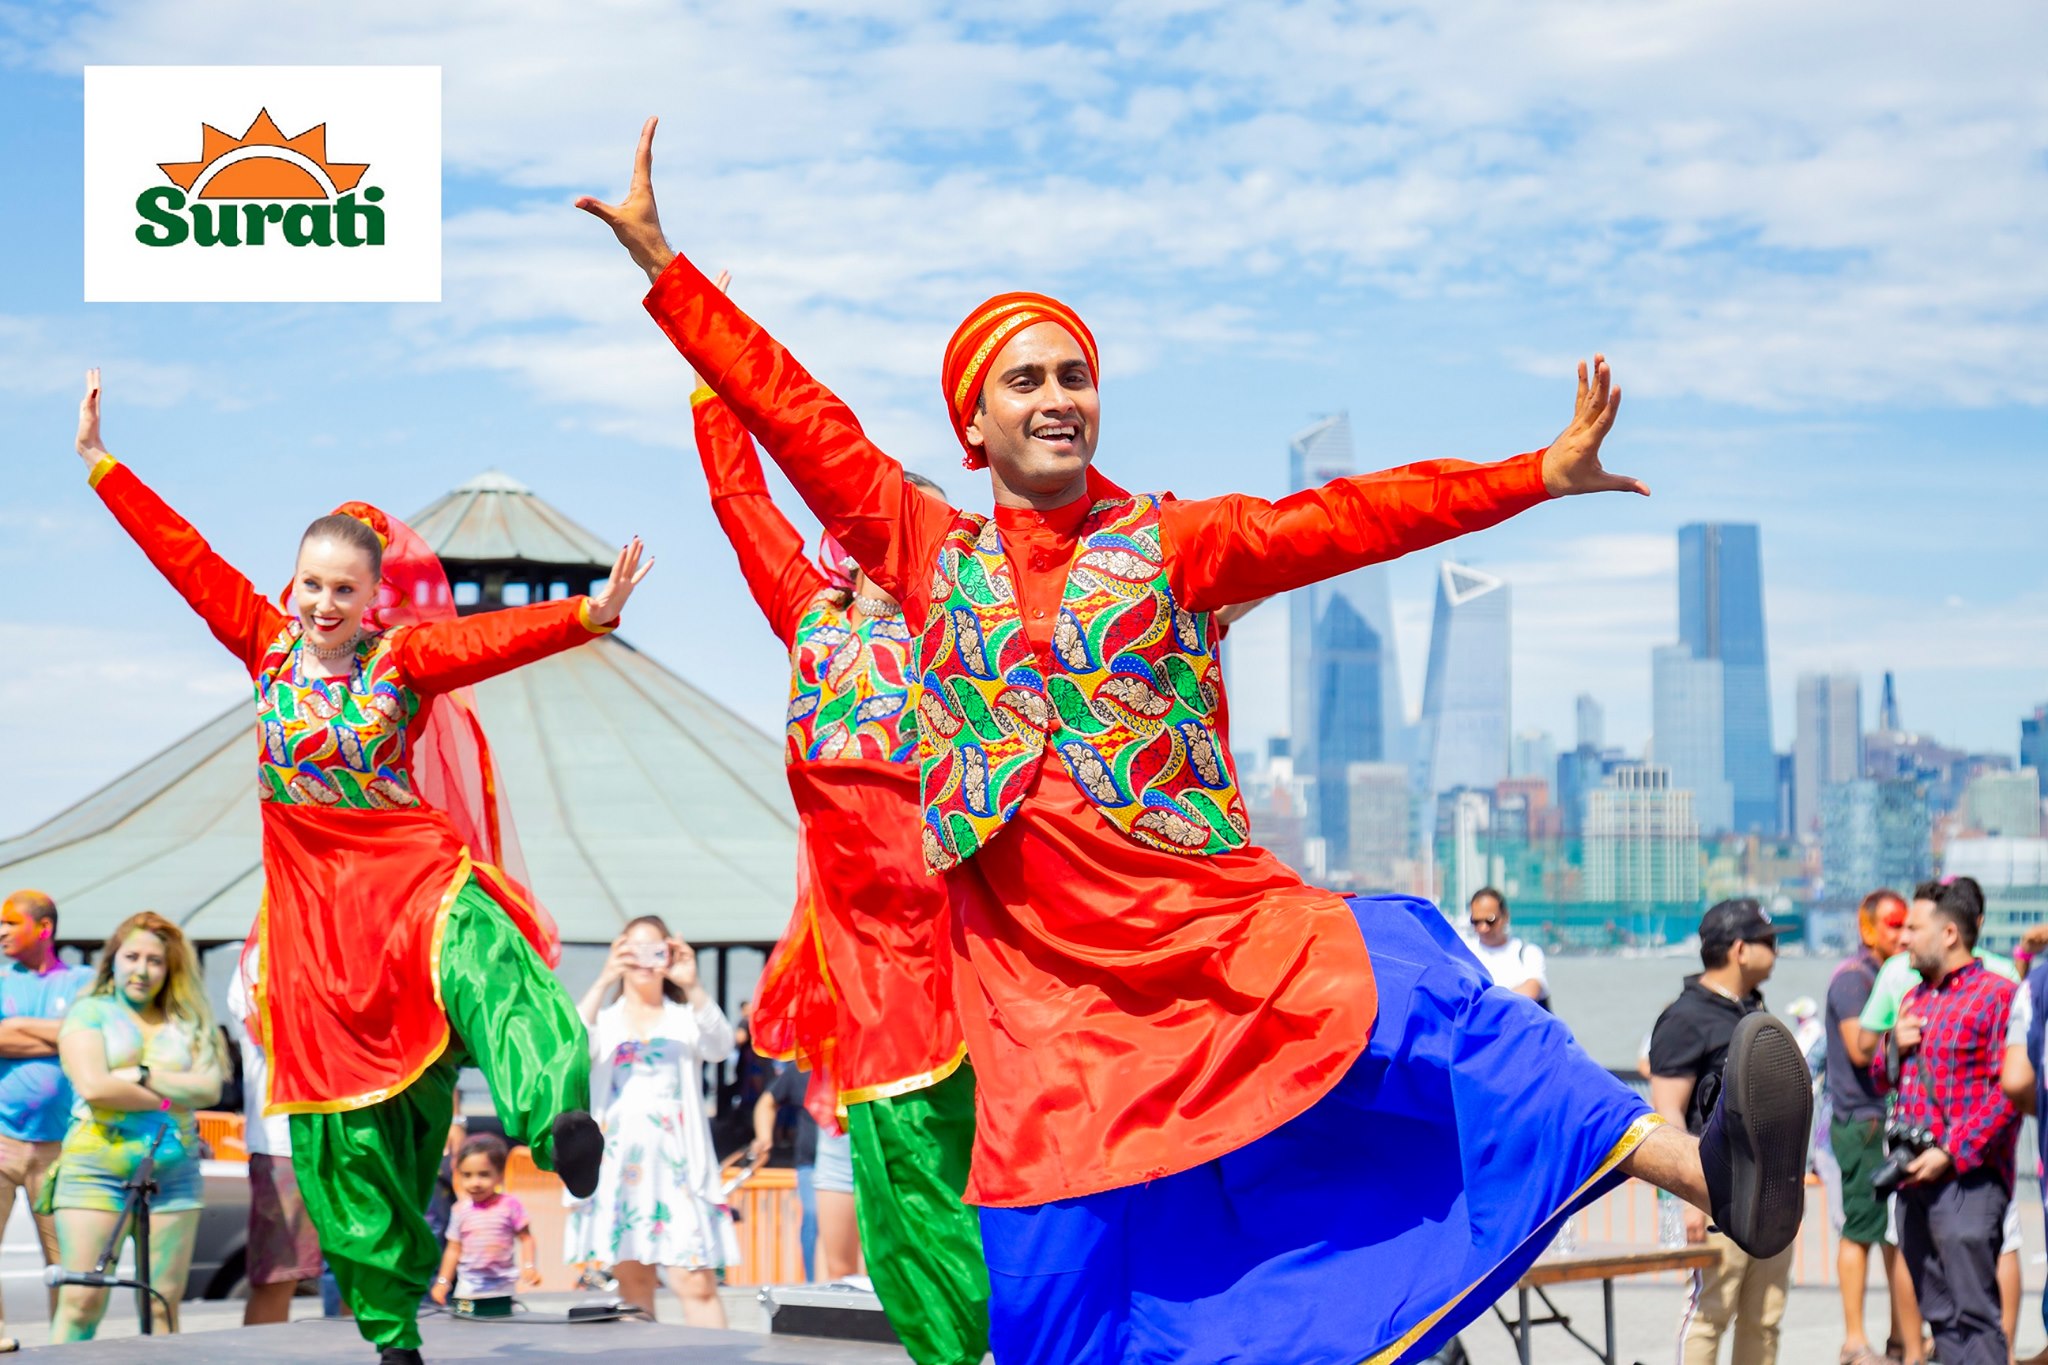 Surati dancers in matching cultural outfits performing near the waterfront